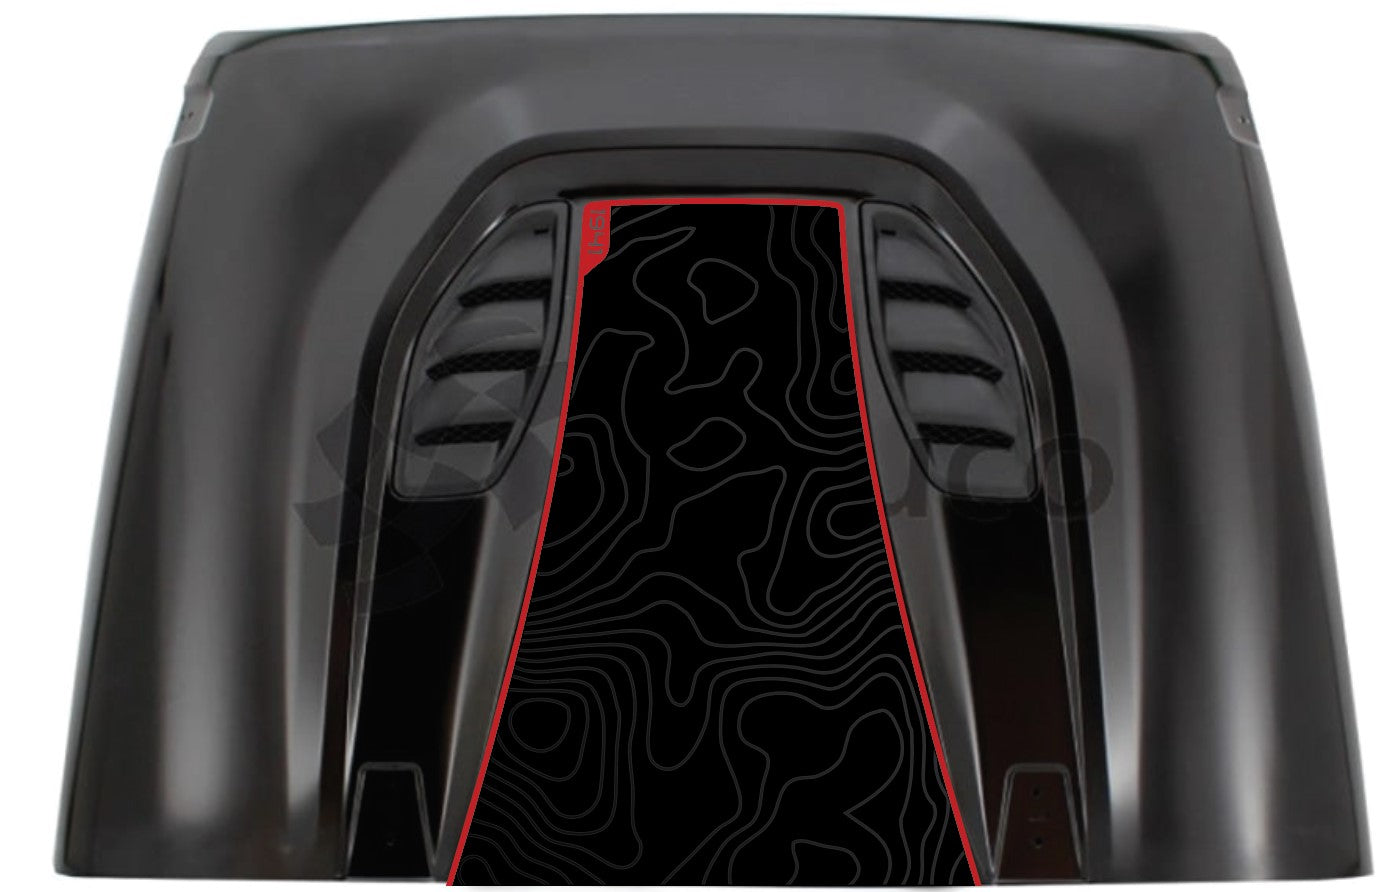 Topographical Hard Rock/Anniversary JK 1941 Red Line Rubicon Blackout Hood Decal- Fits Jeep Wrangler JK Hood Decal (3 Pieces)